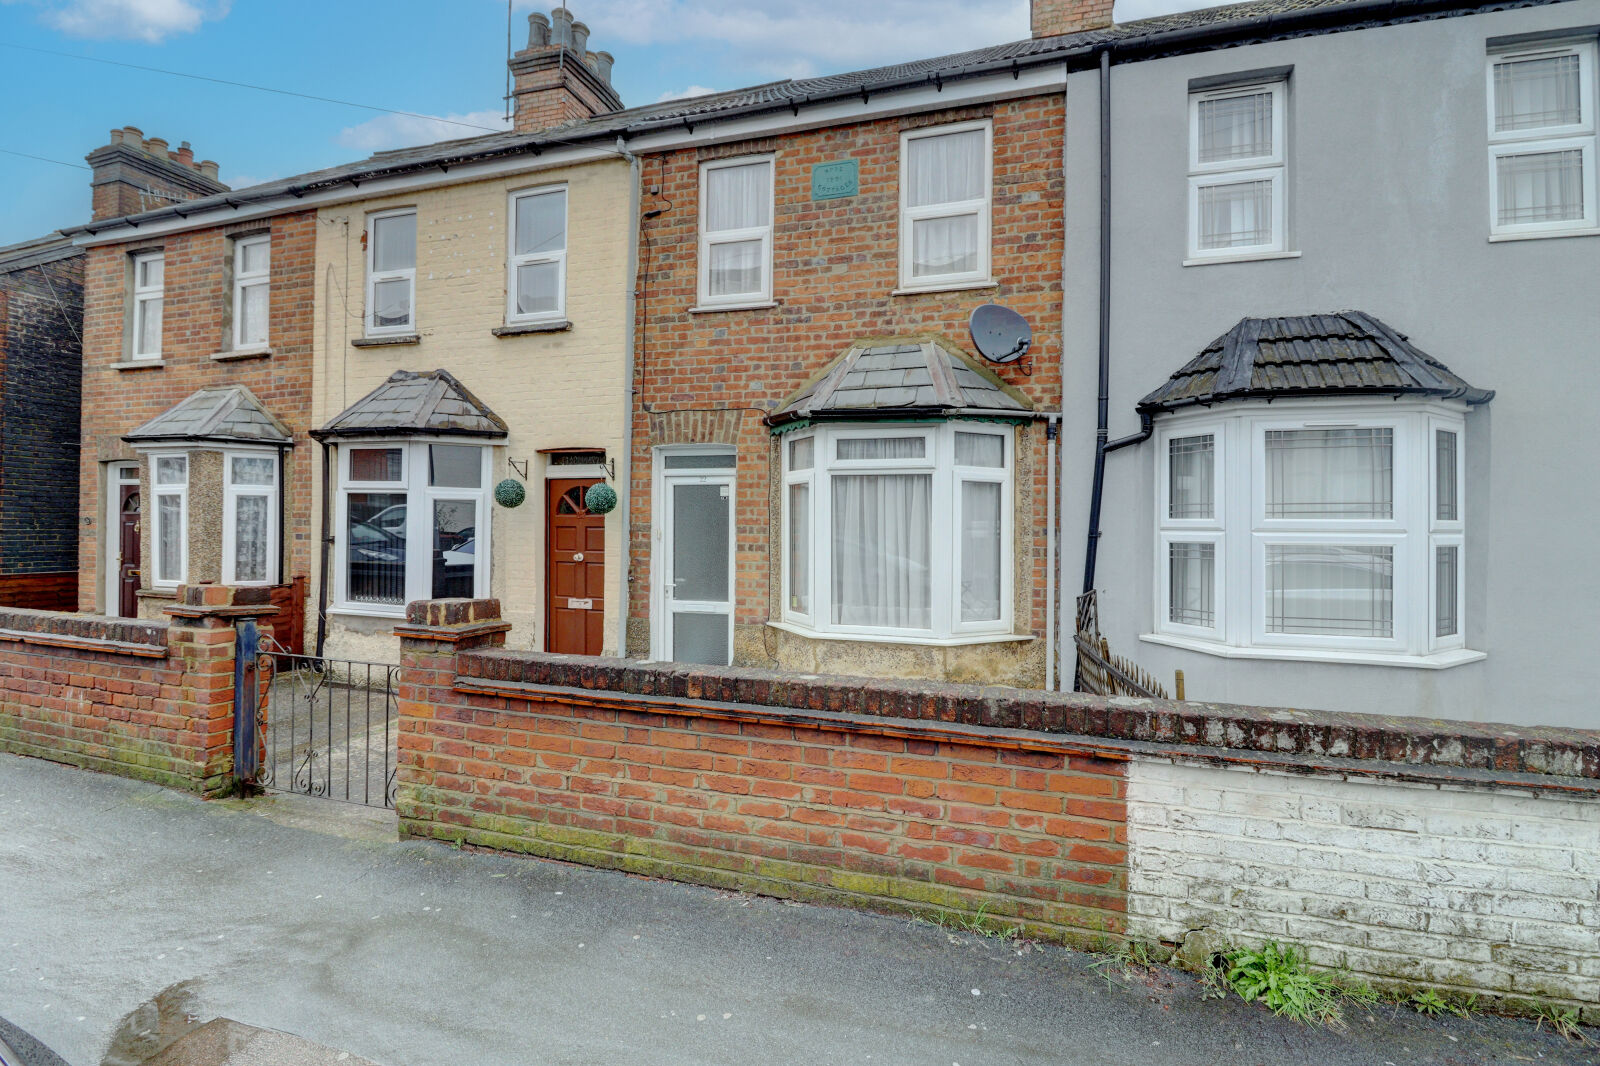 3 bedroom mid terraced house for sale Dashwood Avenue, High Wycombe, HP12, main image